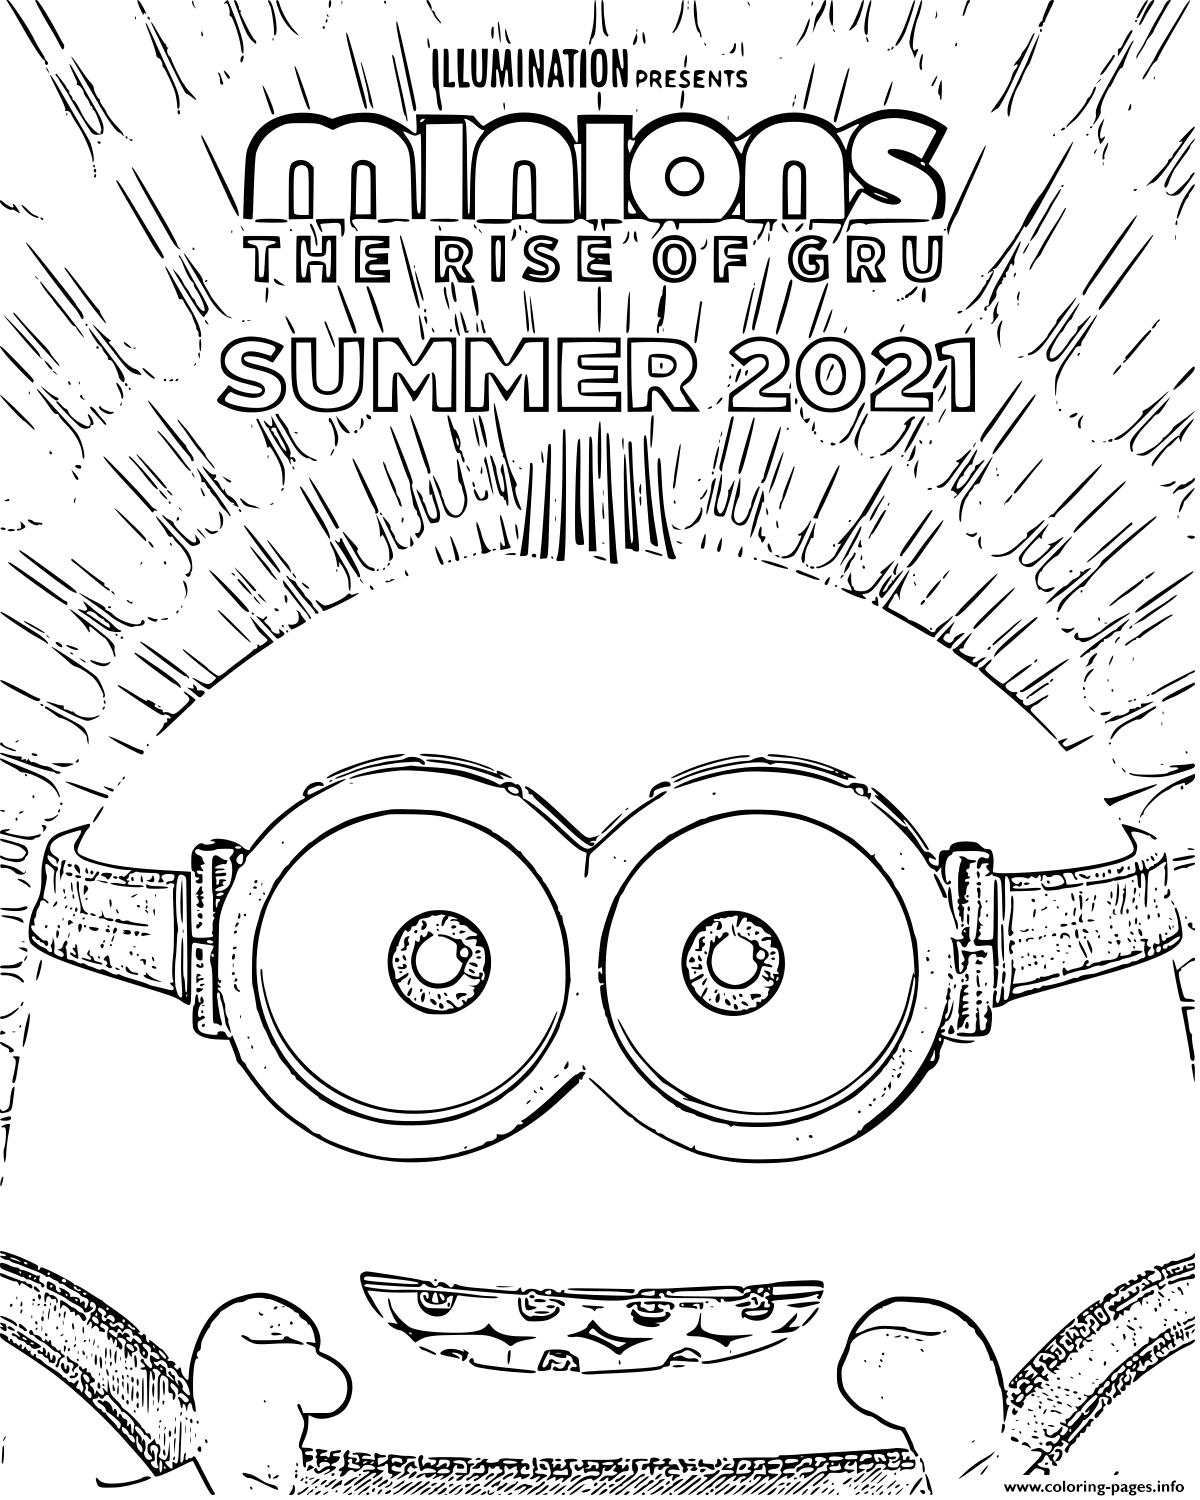 Minions 2 The Rise Of Gru 2021 coloring